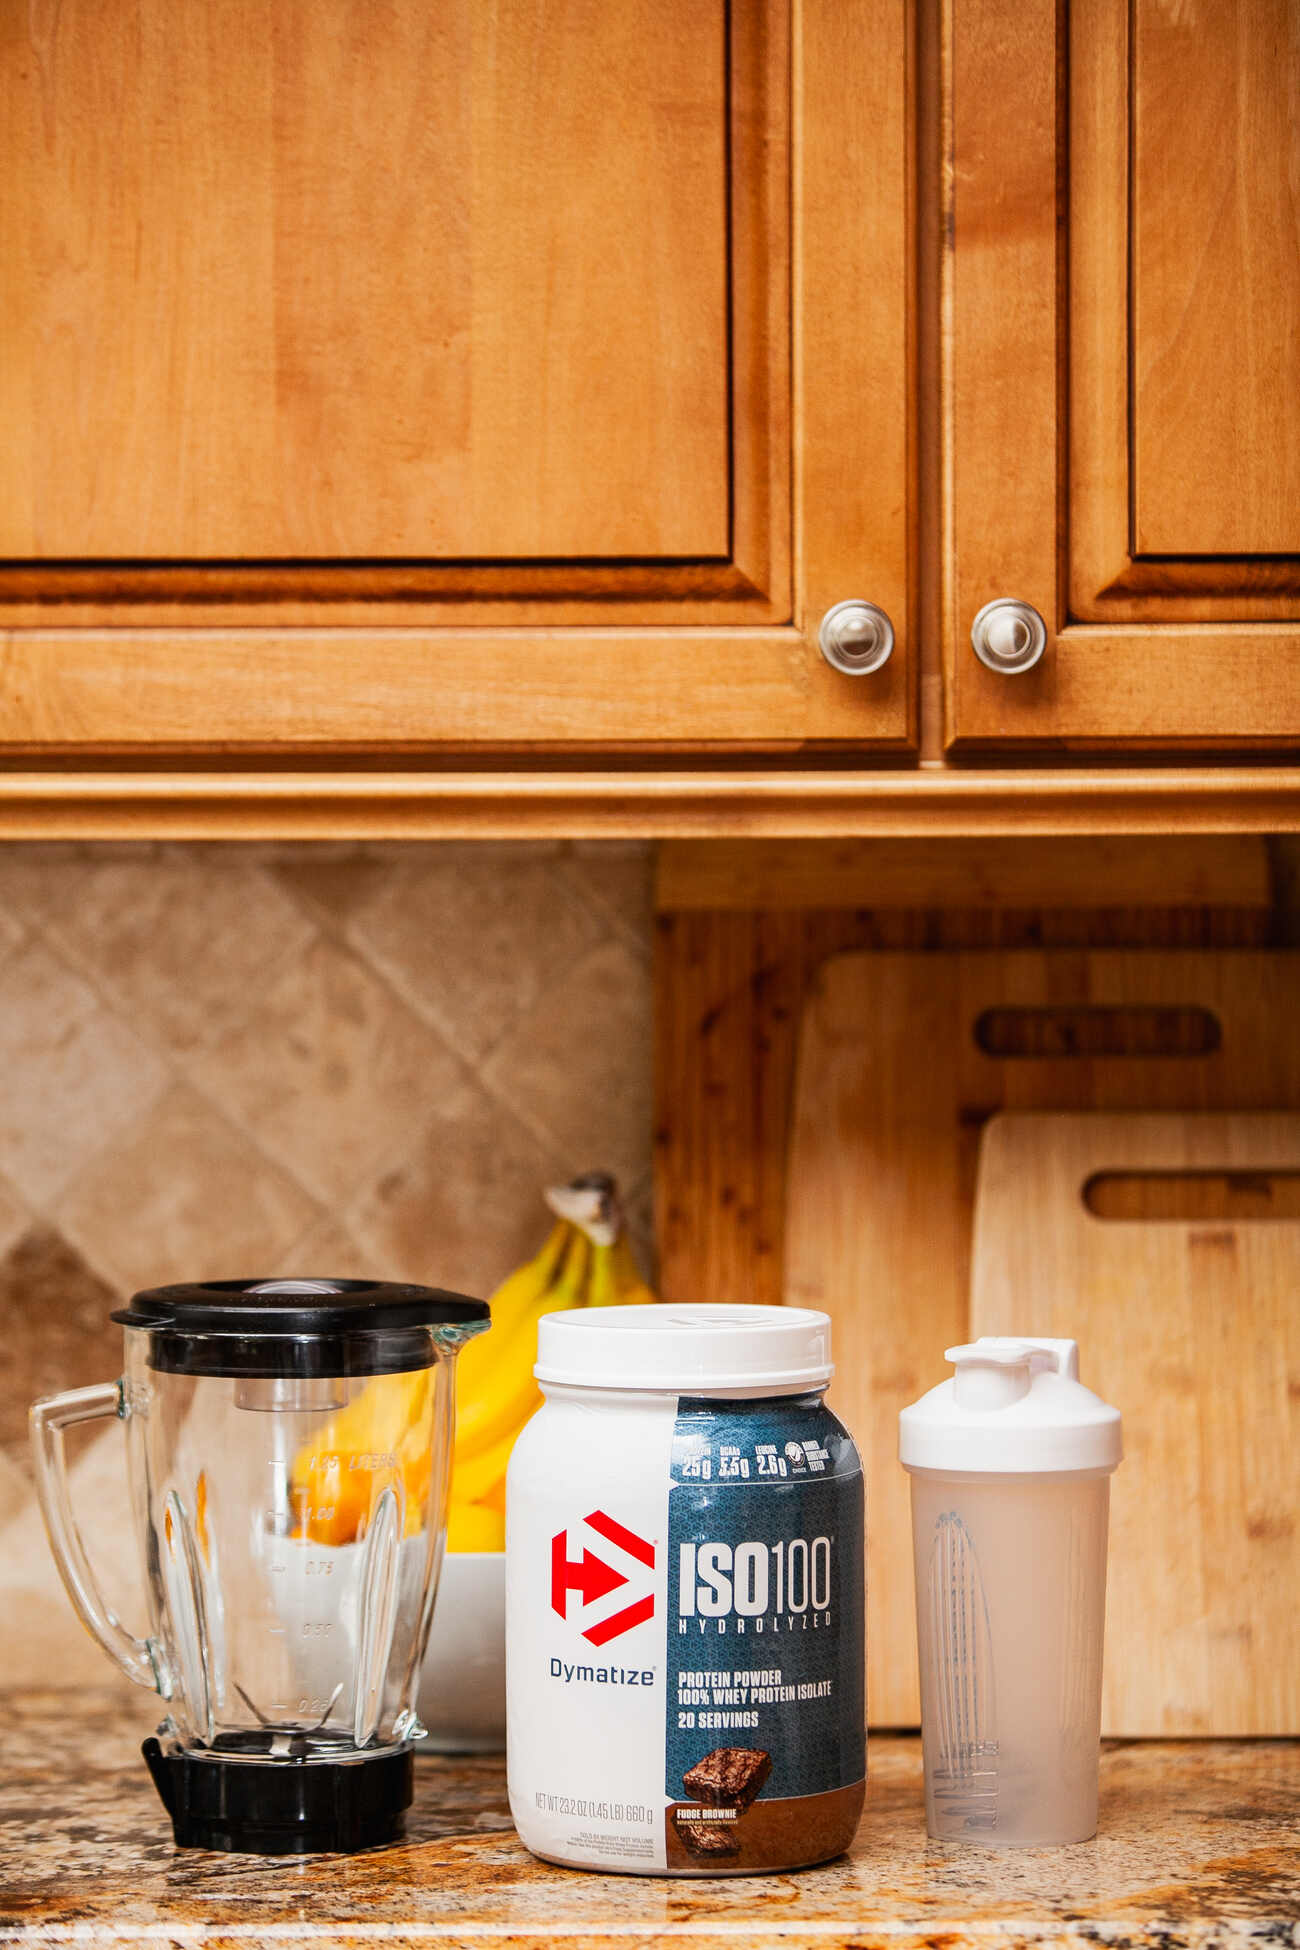 A kitchen counter with a protein powder jar, a blender, and a shaker bottle, with wooden cabinets in the background